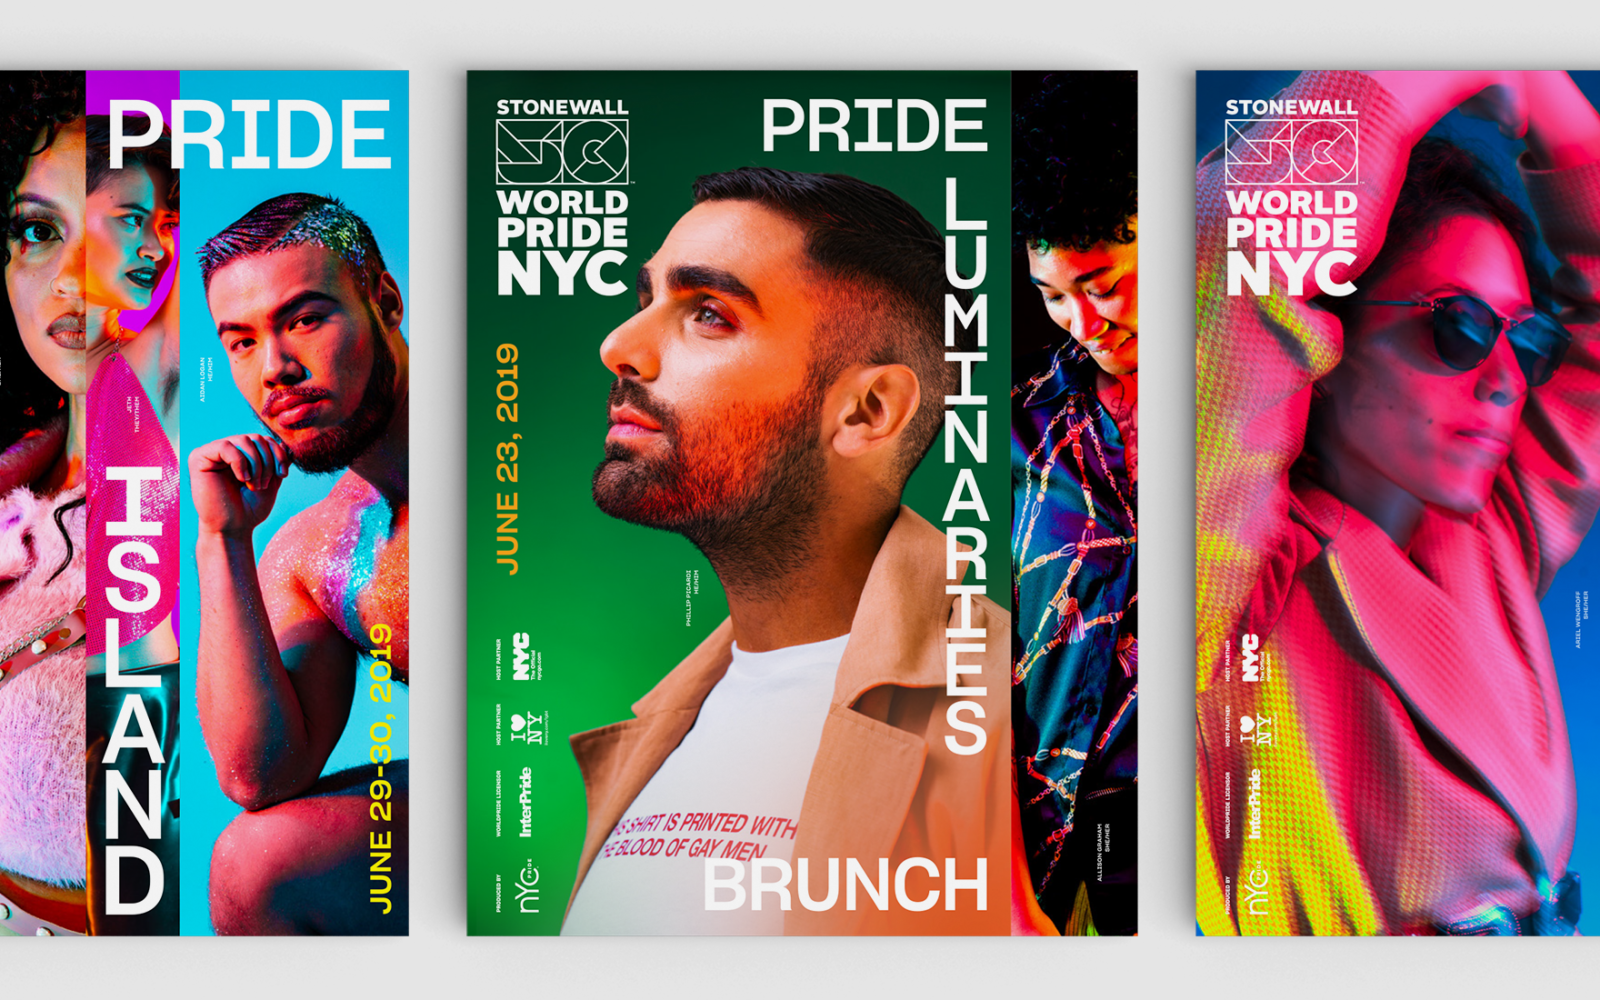 Announcing NYC Pride’s Official Campaign